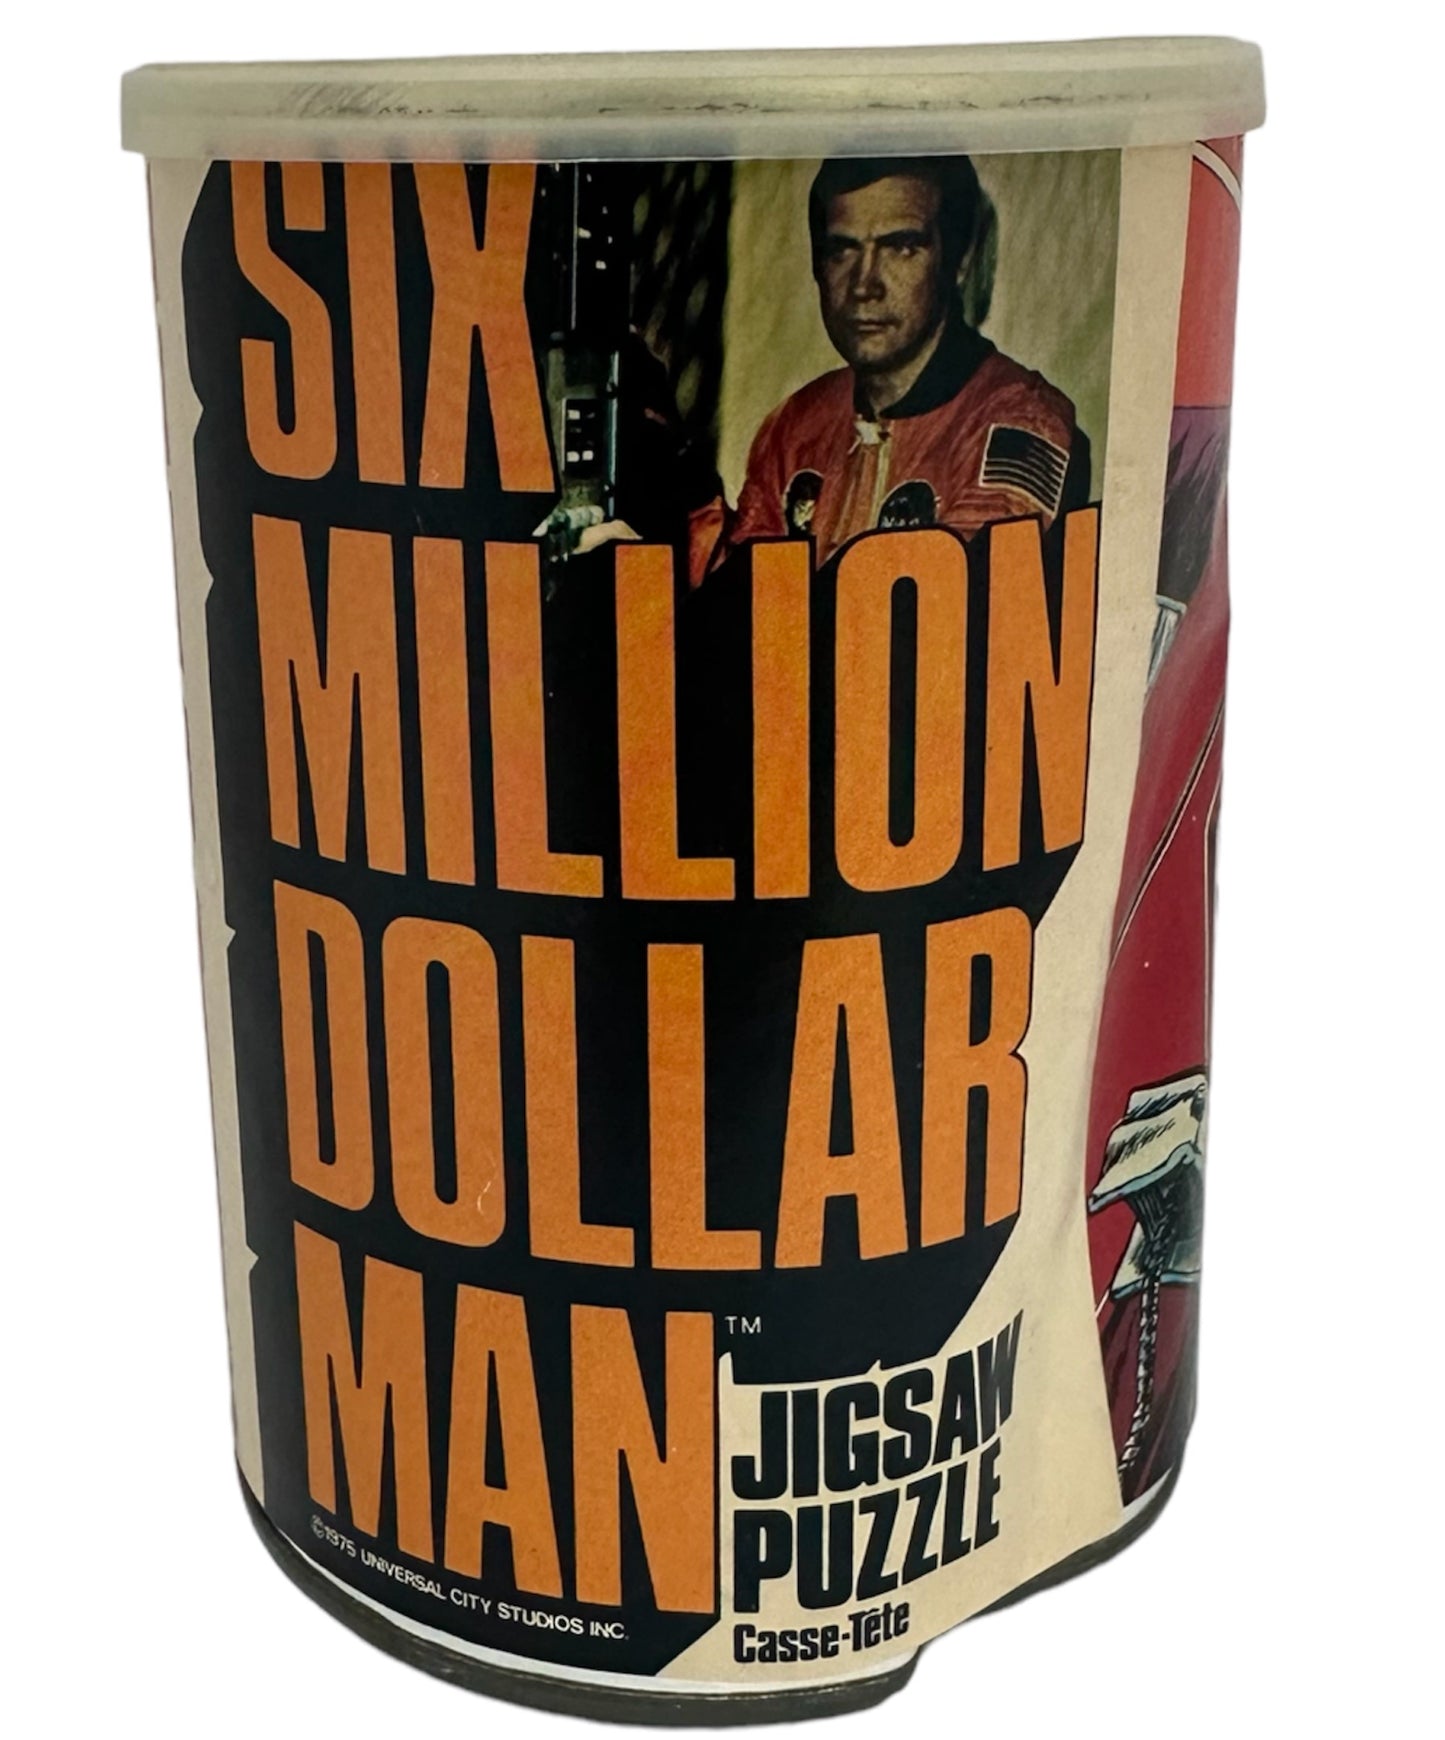 Vintage 1975 American Publishing - The Six Million Dollar Man 200  Piece Artwork Jigsaw Puzzle Number 1240  Steve Austin Saves The Girl - New In Sealed Tin - Shop Stock Room Find